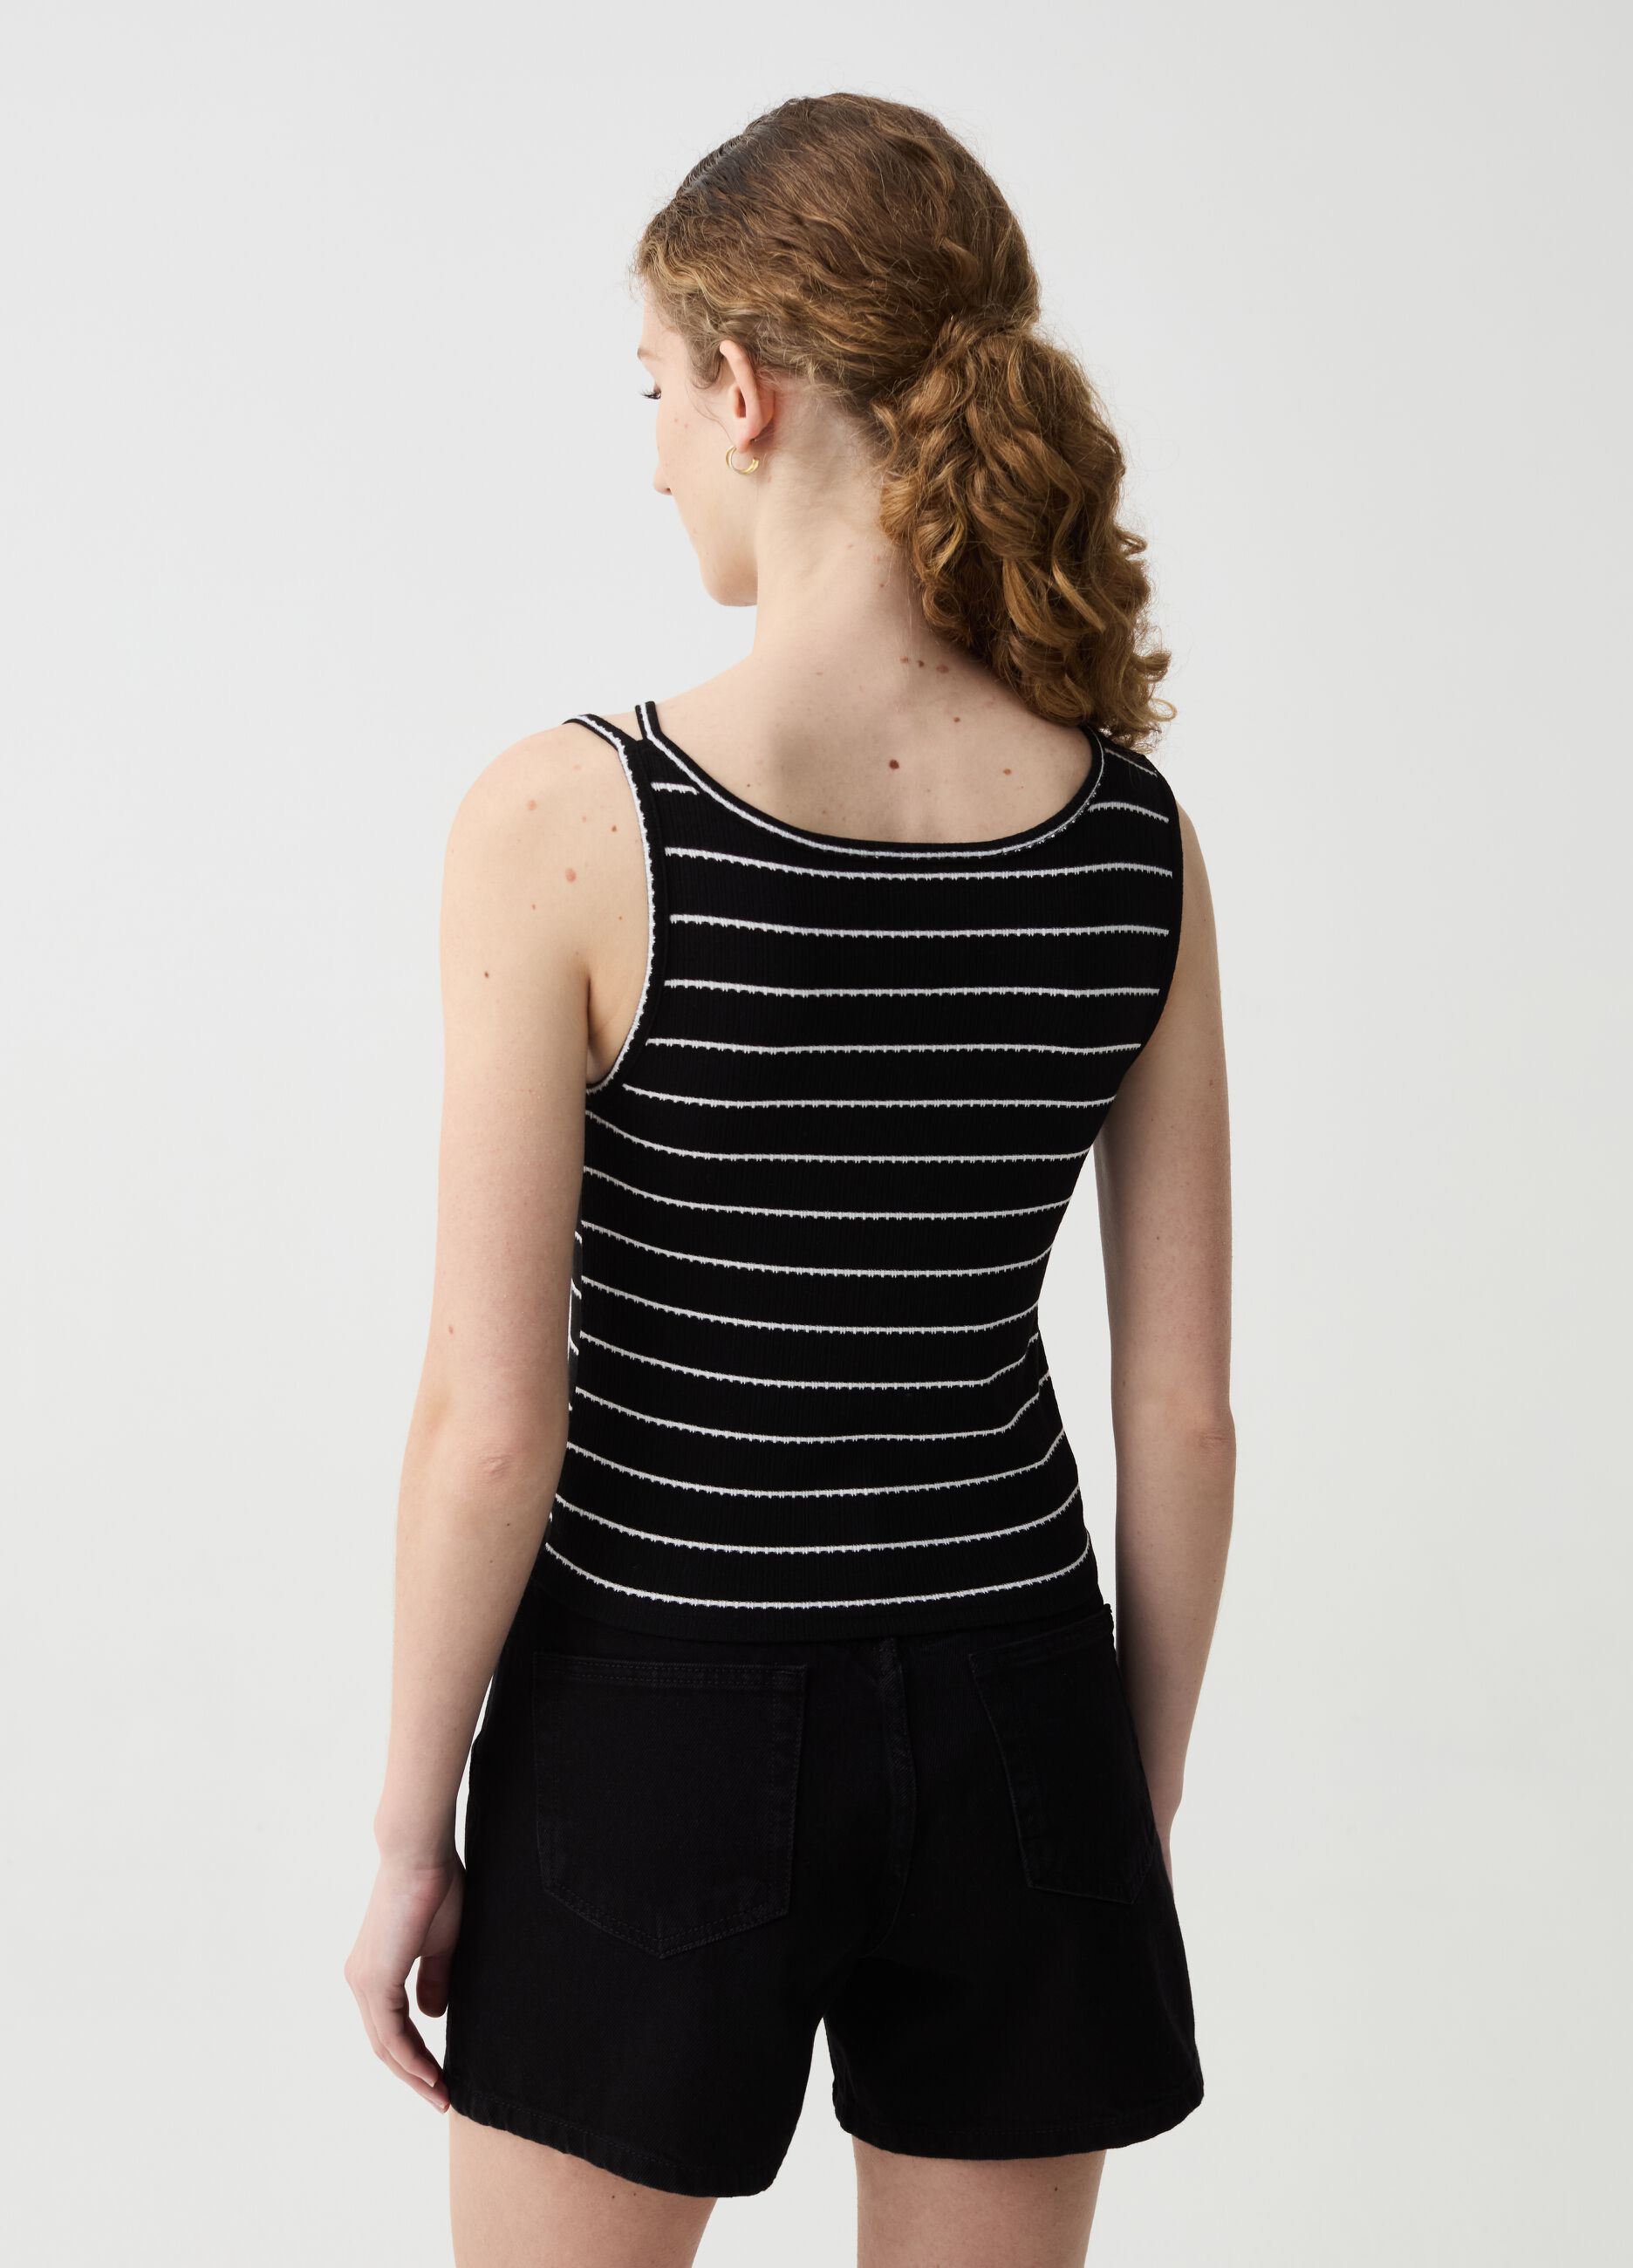 Striped tank top with cut-out detailing